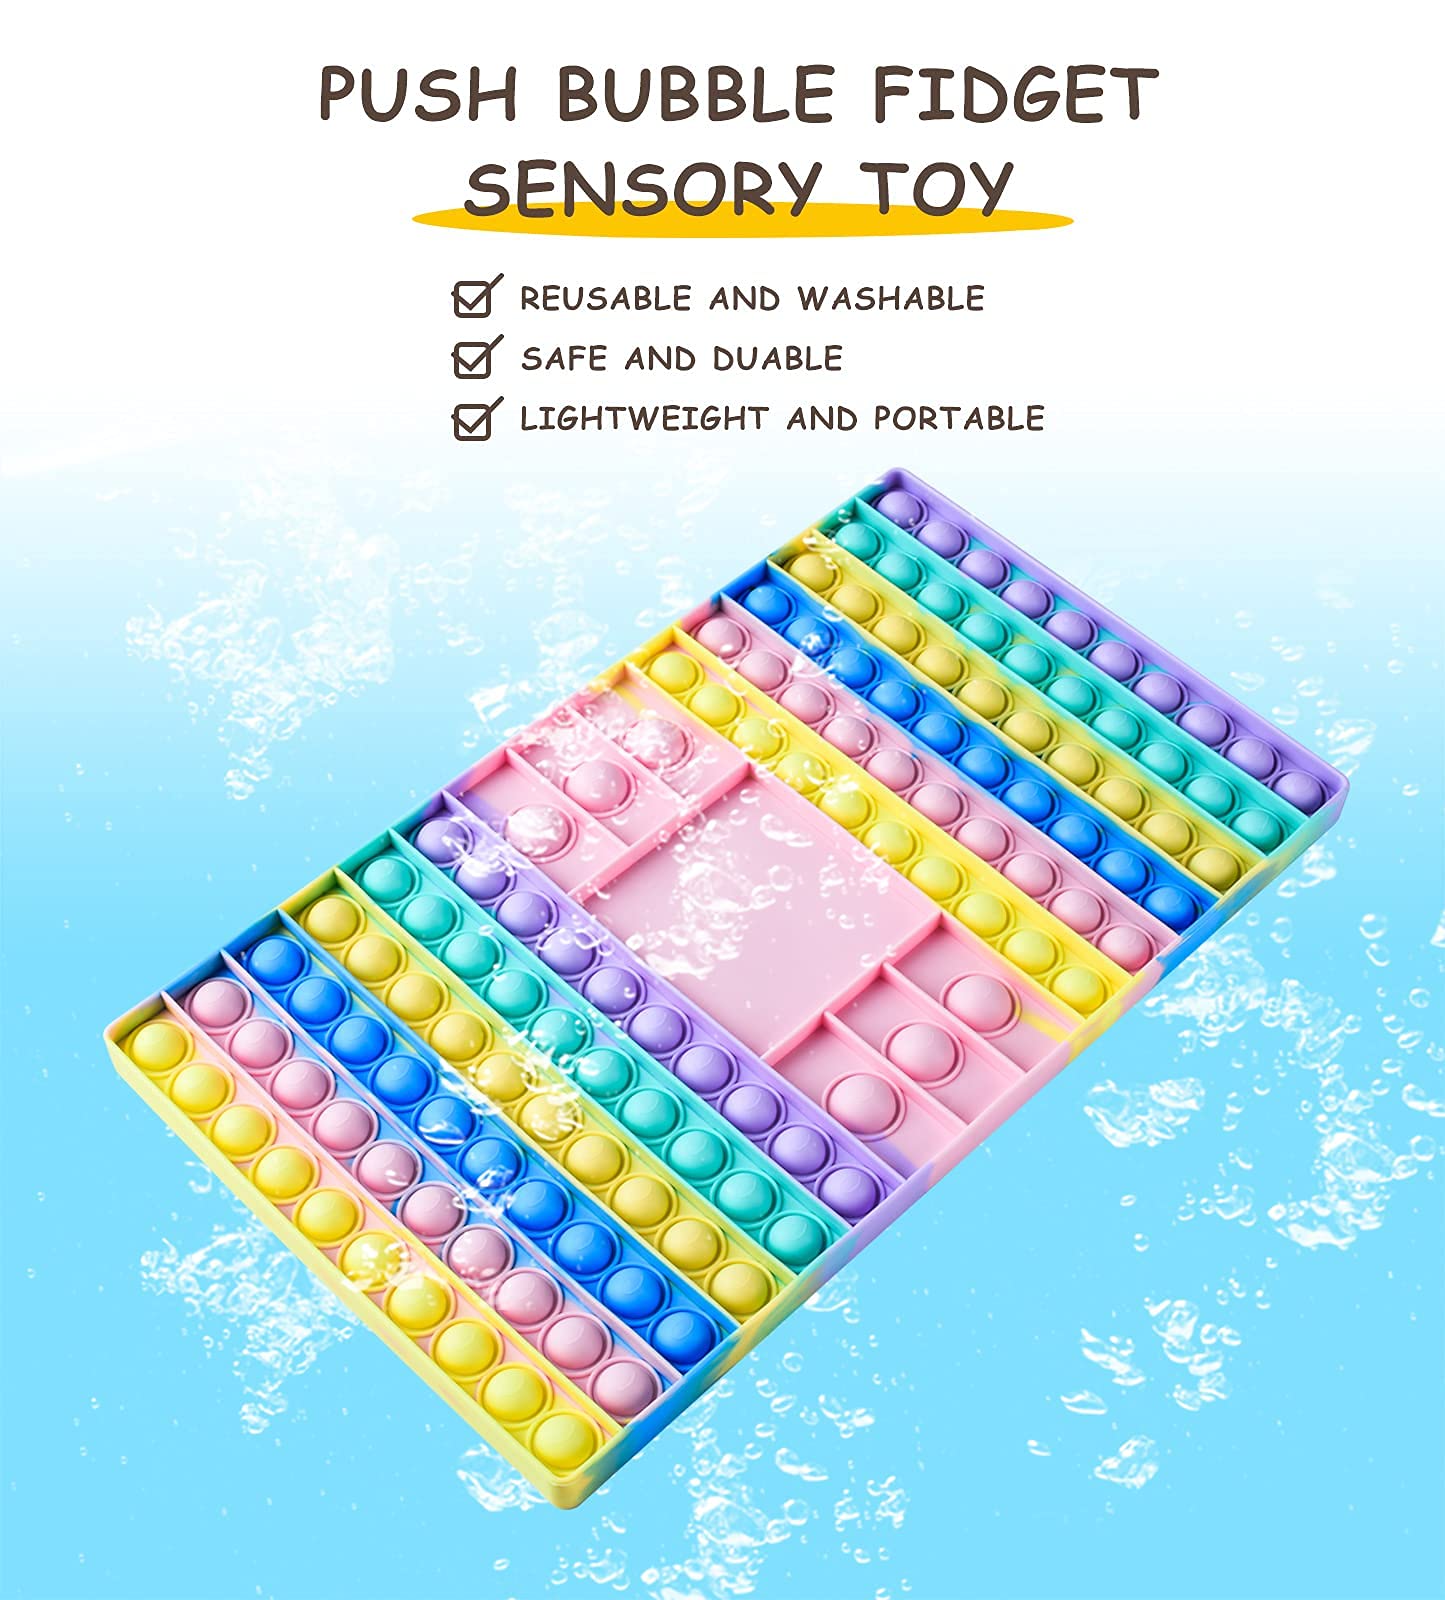 Big Size Pop Game Fidget Toy, Silicone Bubble Rainbow Chess Board Push Popping Sound Popper Sensory Toys for Parent Child, Interactive Jumbo Stress Anxiety Relief Toy Play with Friends (Rectangle)